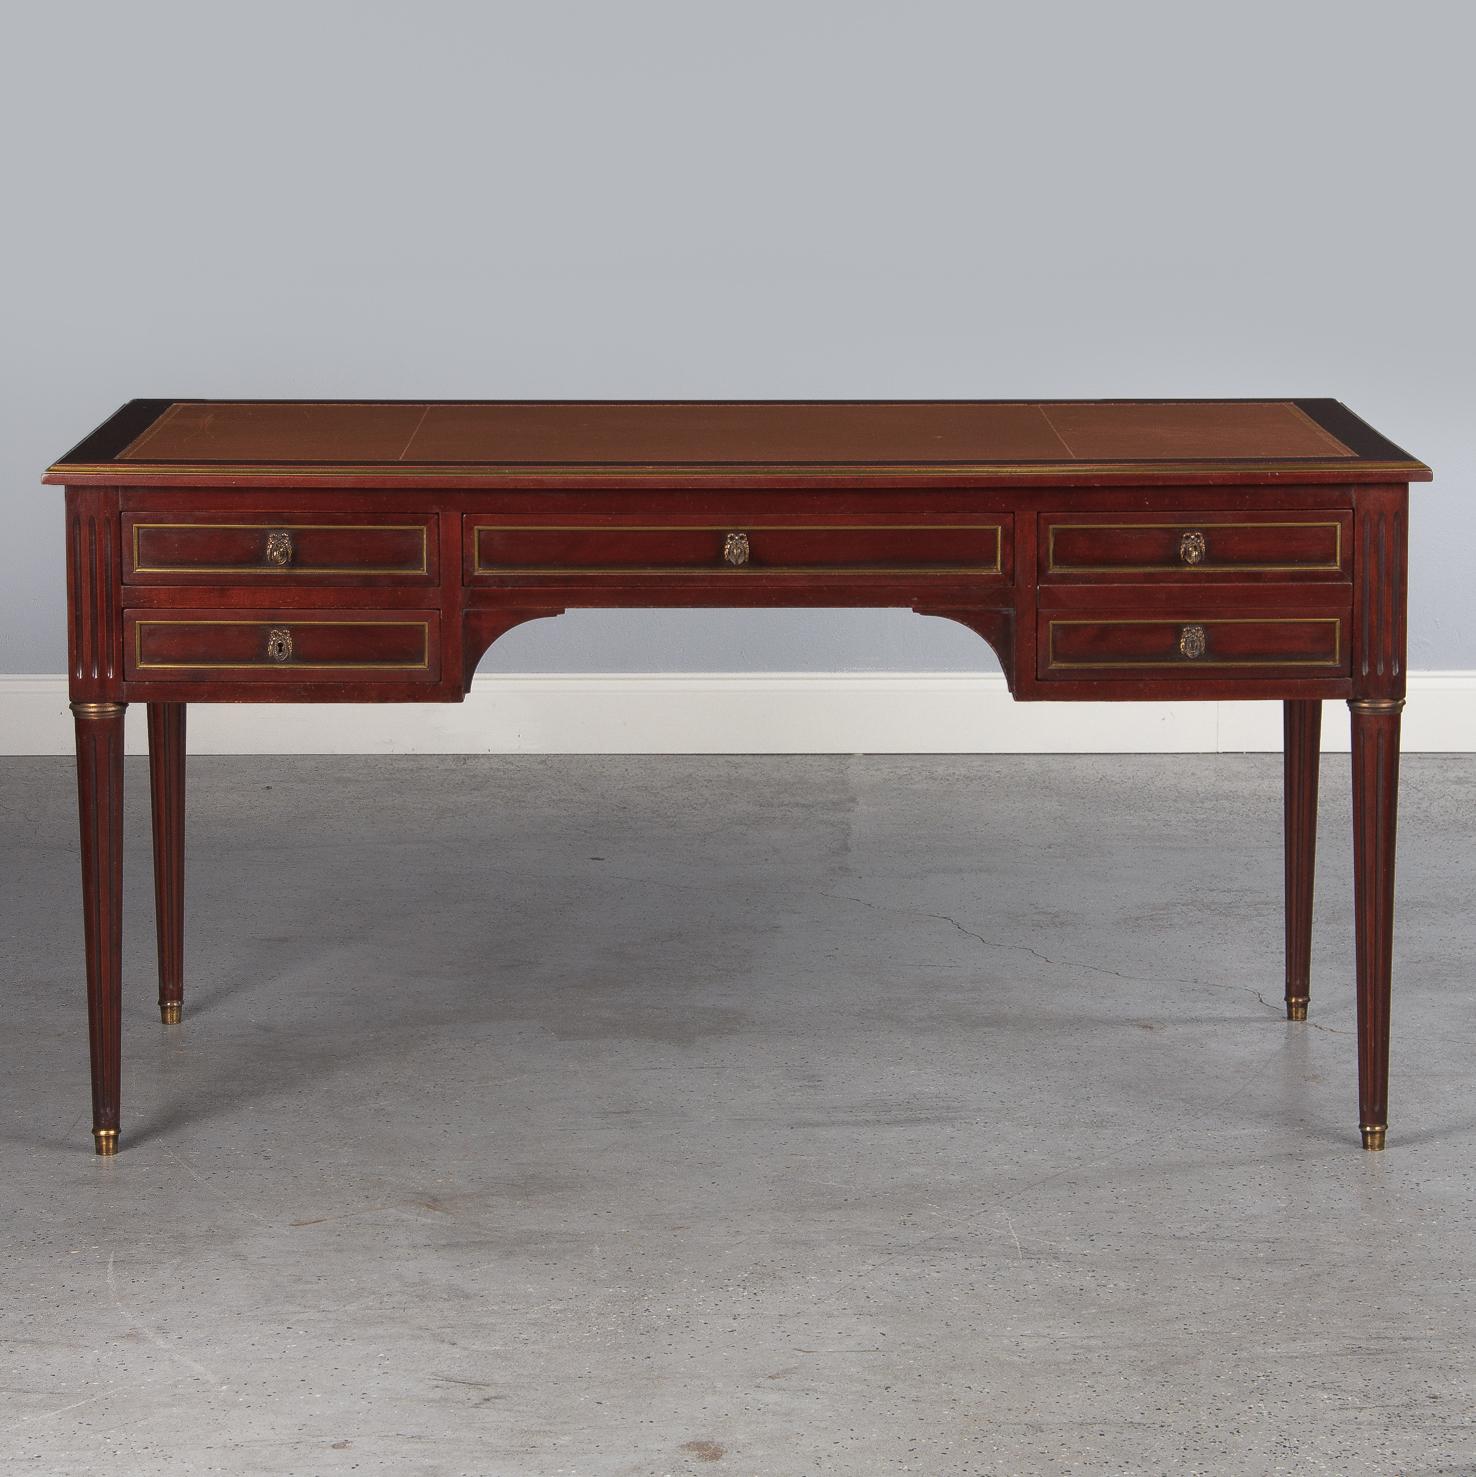 Embossed French Louis XVI Style Mahogany Desk with Leather Top, 1950s